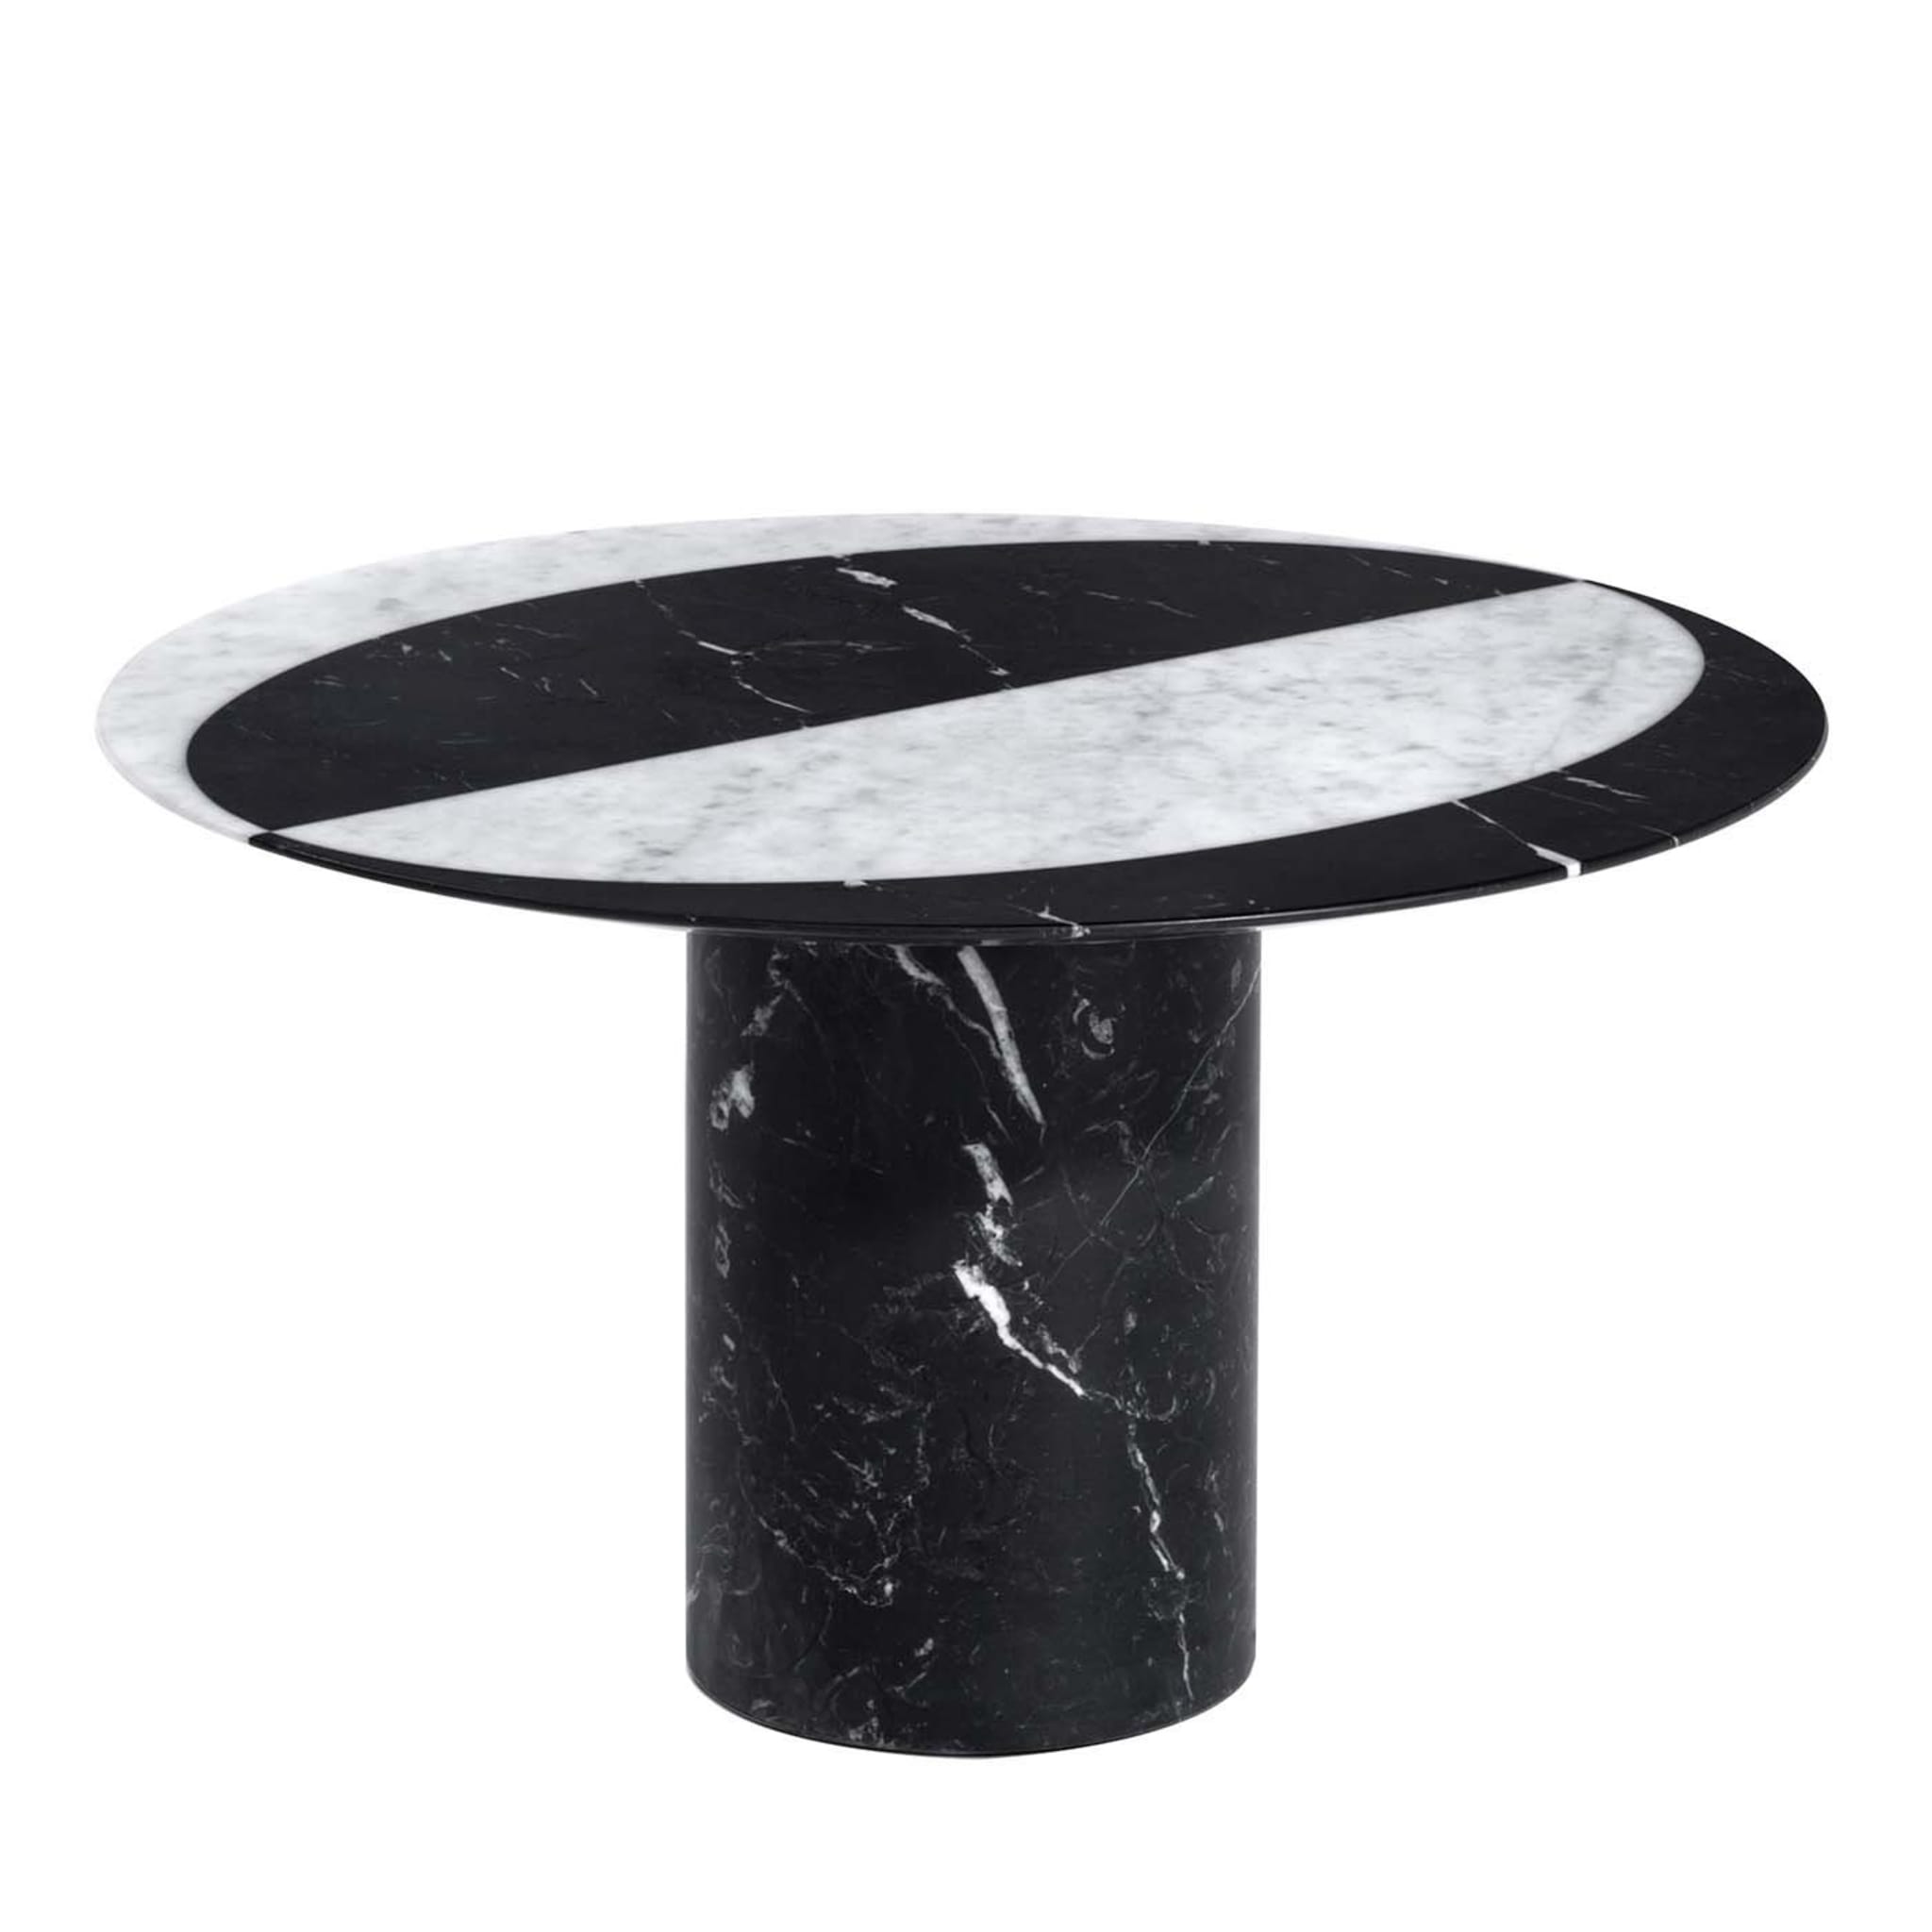 Proiezioni Round Black and White Marble Coffee Table by Elisa Ossino - Main view